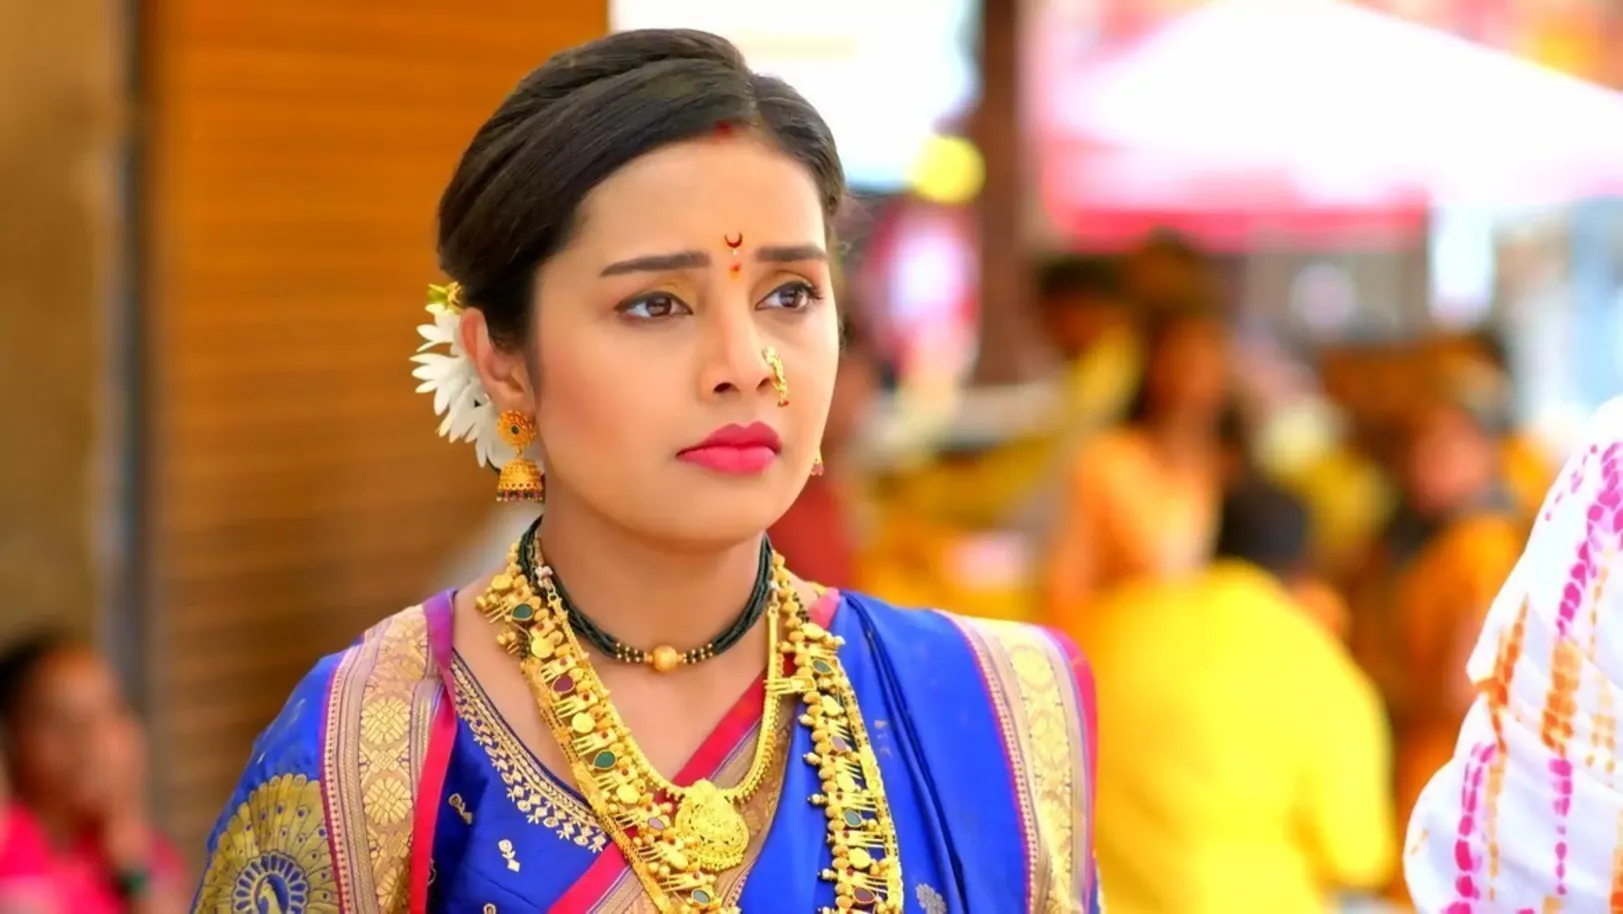 Akshara and Adhipati Learn about a Custom in the temple | Tula Shikvin Changlach Dhada 